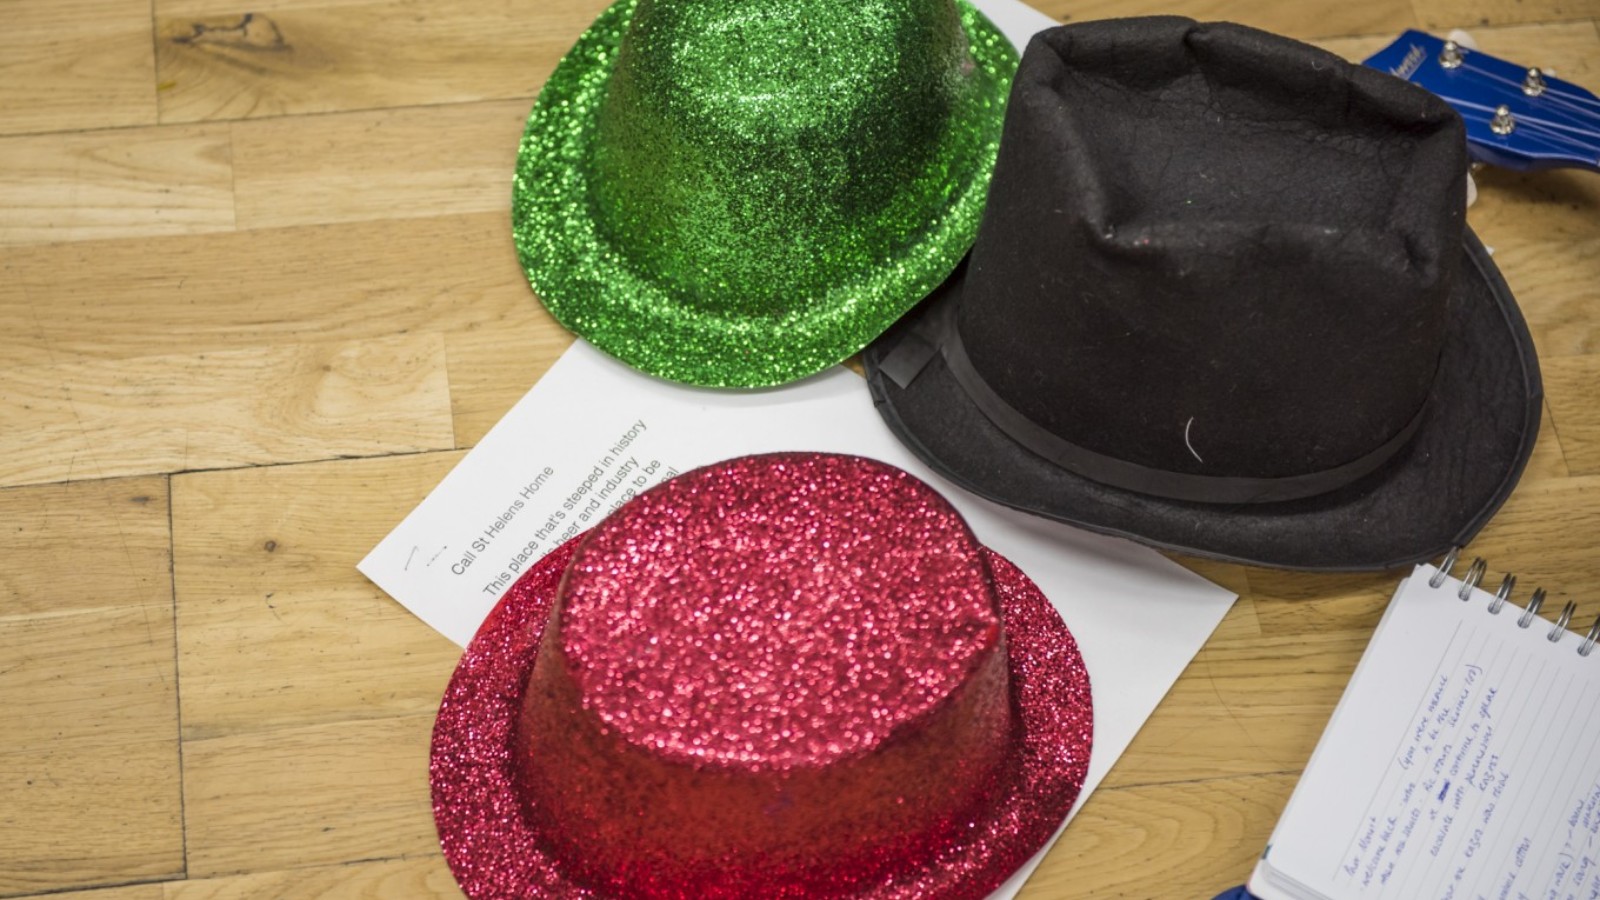 A red and a green glittery hat and a black top hate sit on a wooden floor with notepads and papers.